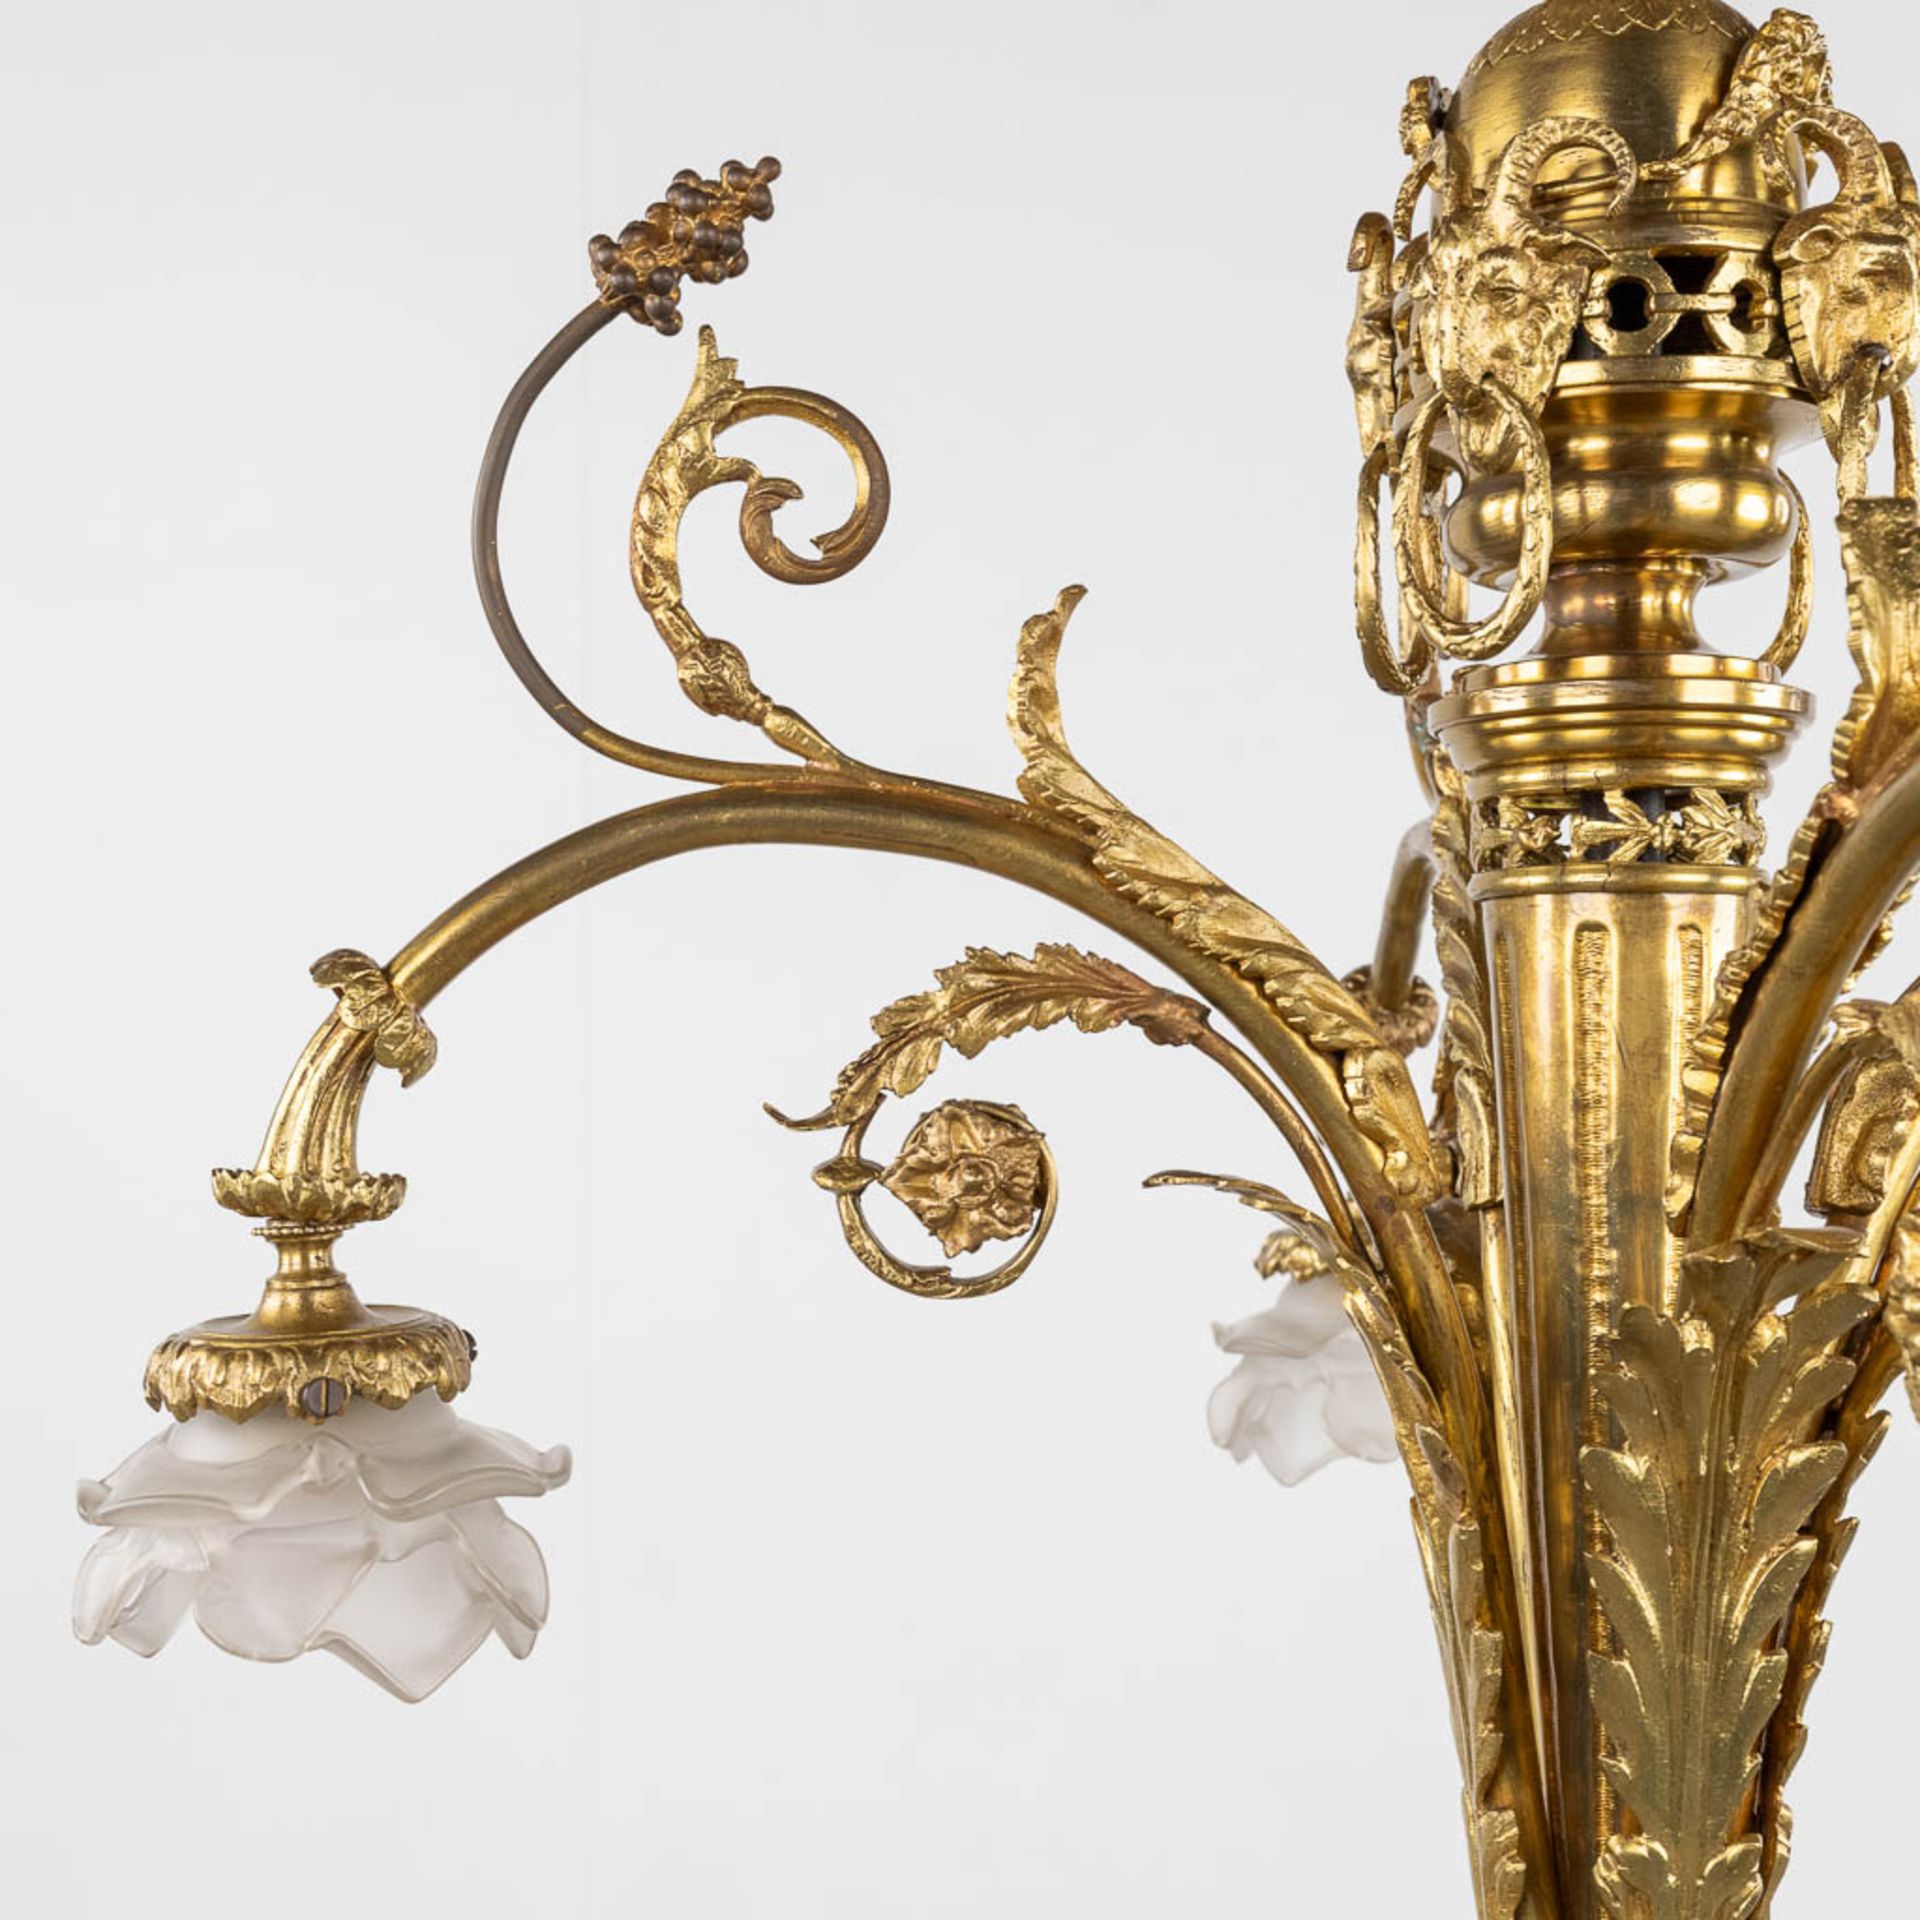 A chandelier, bronze finished with ram's heads, Louis XVI style. (H:93 x D:66 cm) - Image 9 of 13